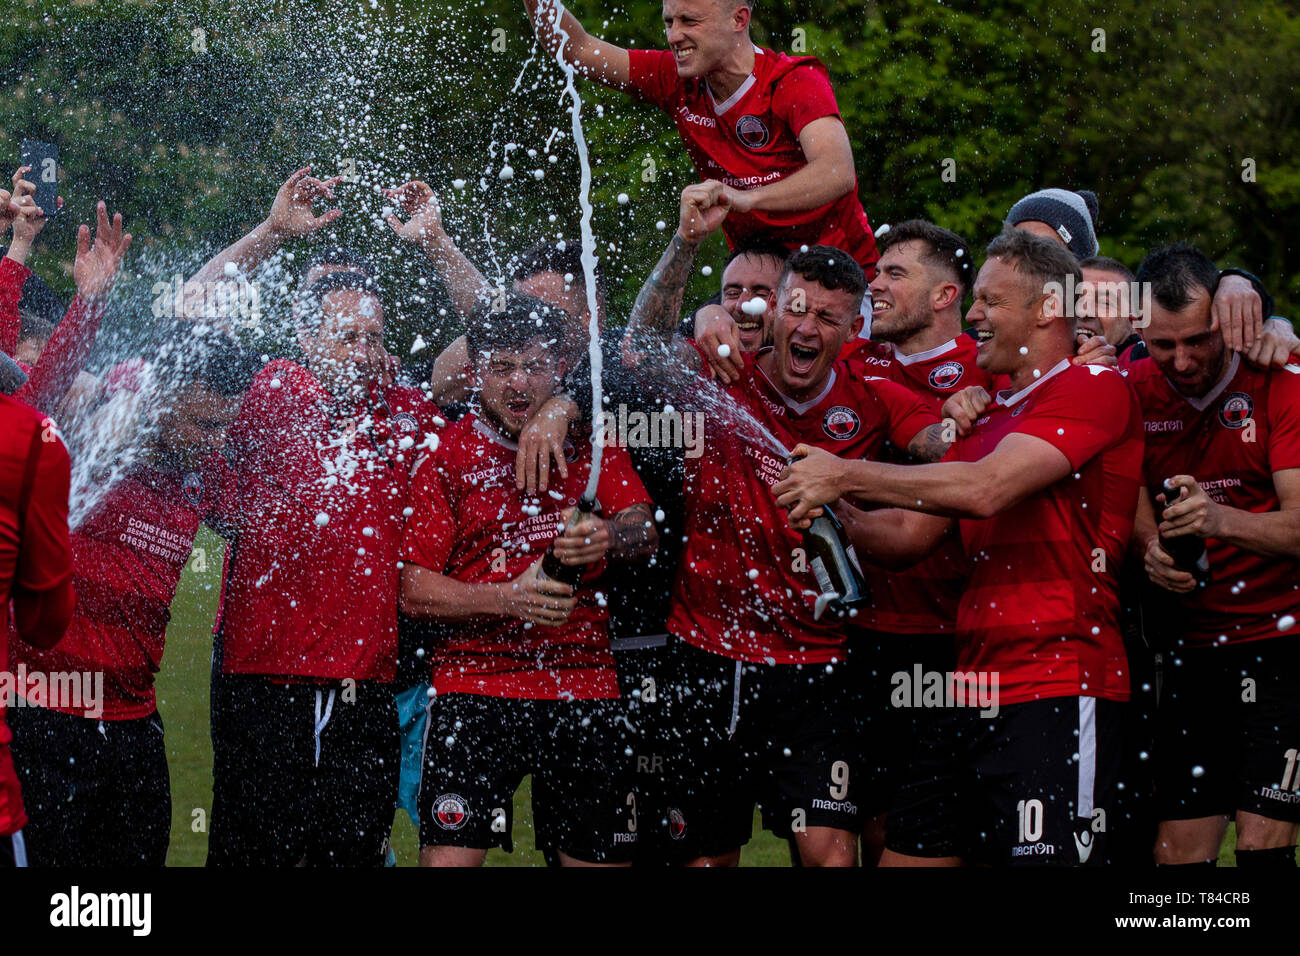 Trefelin BGC earn promotion from Welsh Football League division 3 with a 5-1 win over Ynysygerwn at Ynys Park on the 10th May 2019. Stock Photo